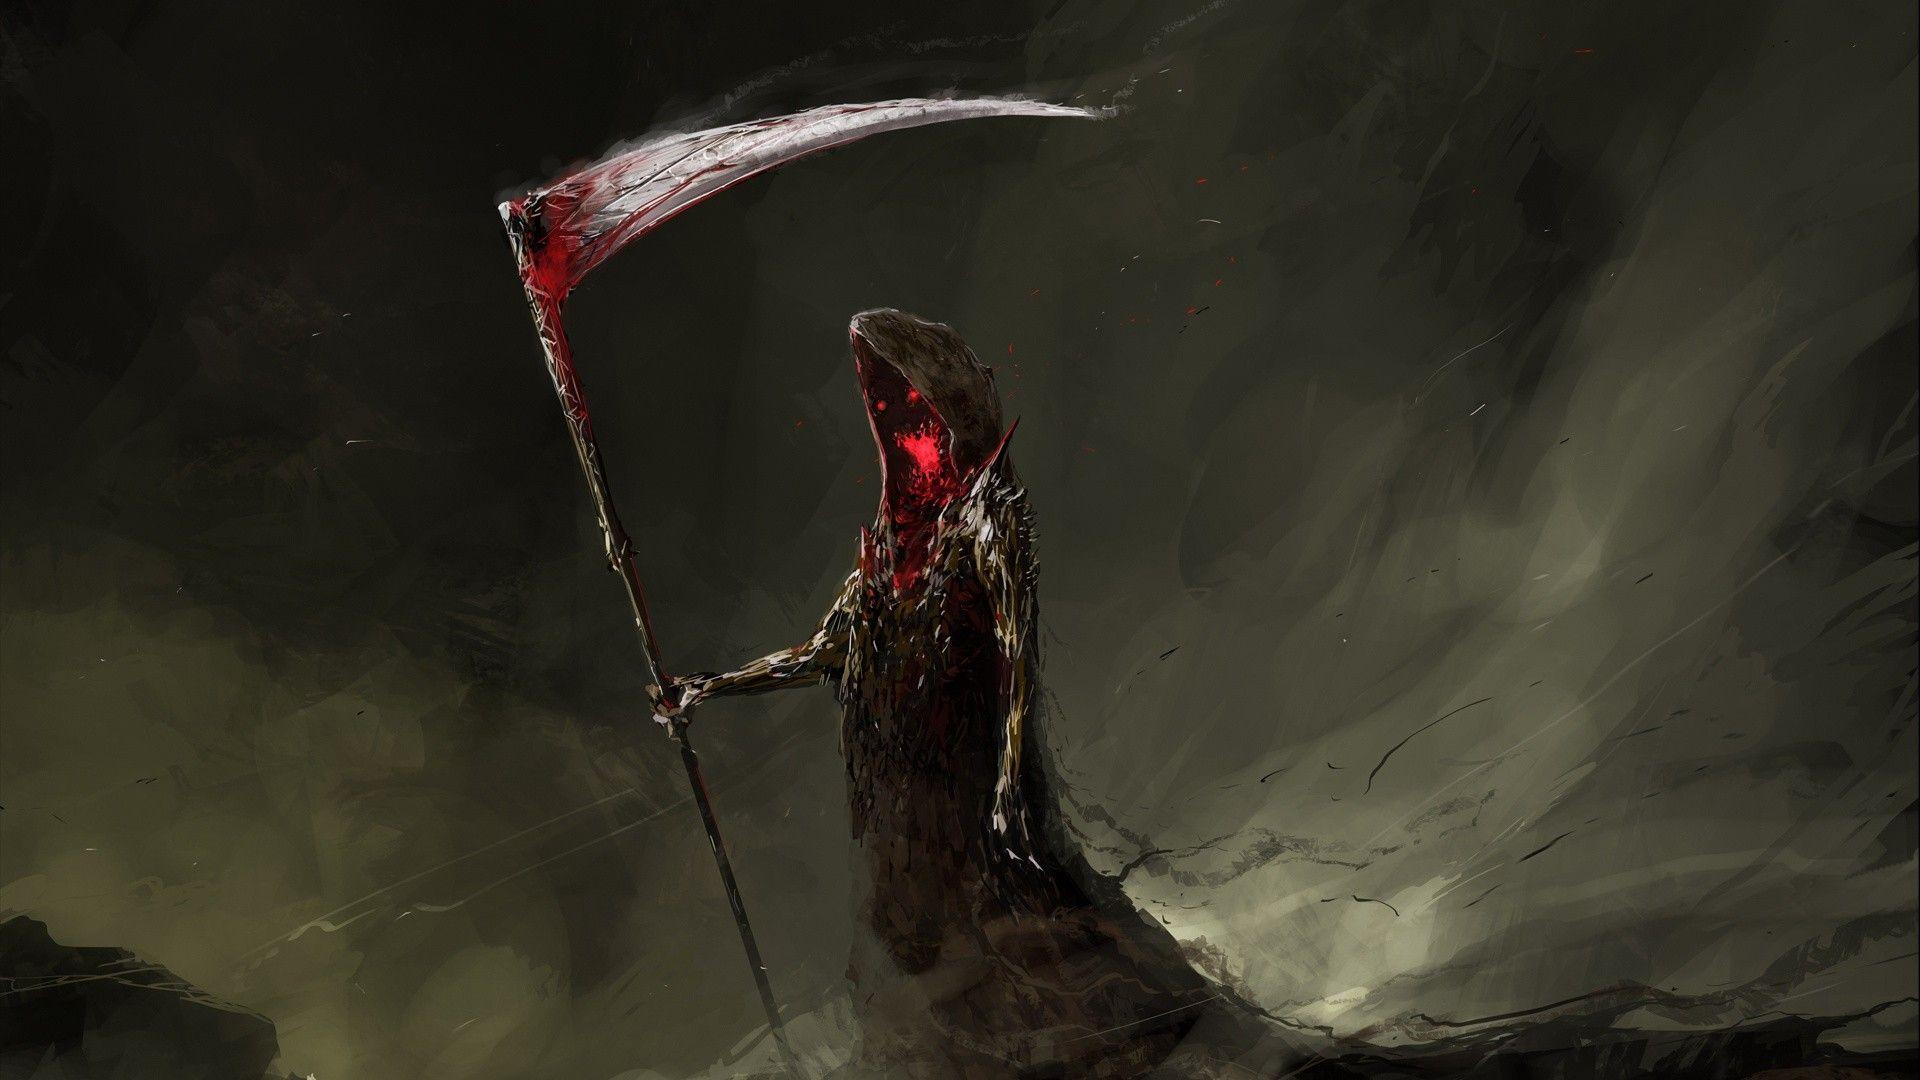 Grim Reaper With Red Background HD Red Aesthetic Wallpapers  HD Wallpapers   ID 56025